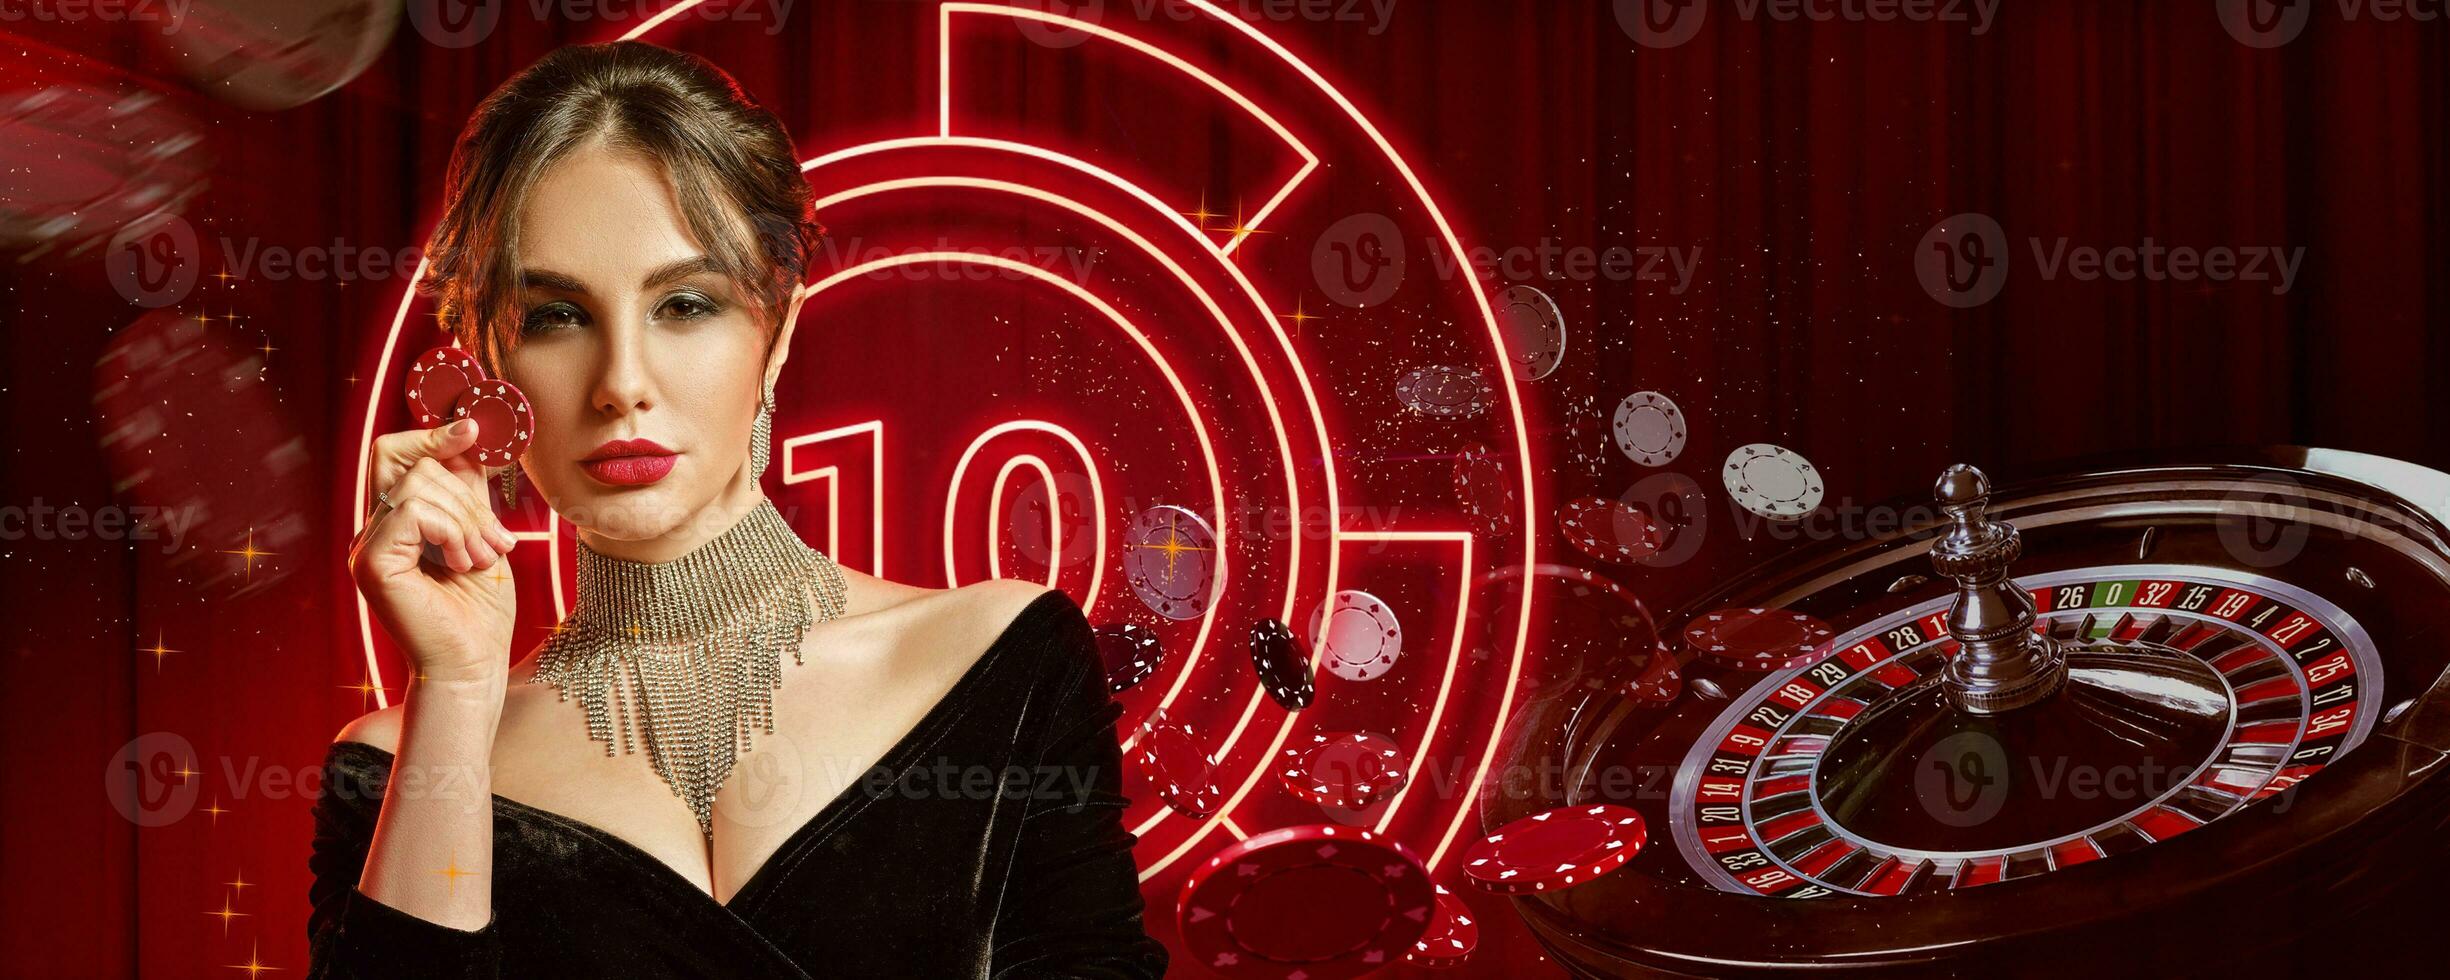 Girl in jewelry and black dress. Showing two red chips, posing on colorful background with neon lights, roulette and chips. Poker, casino. Close-up photo